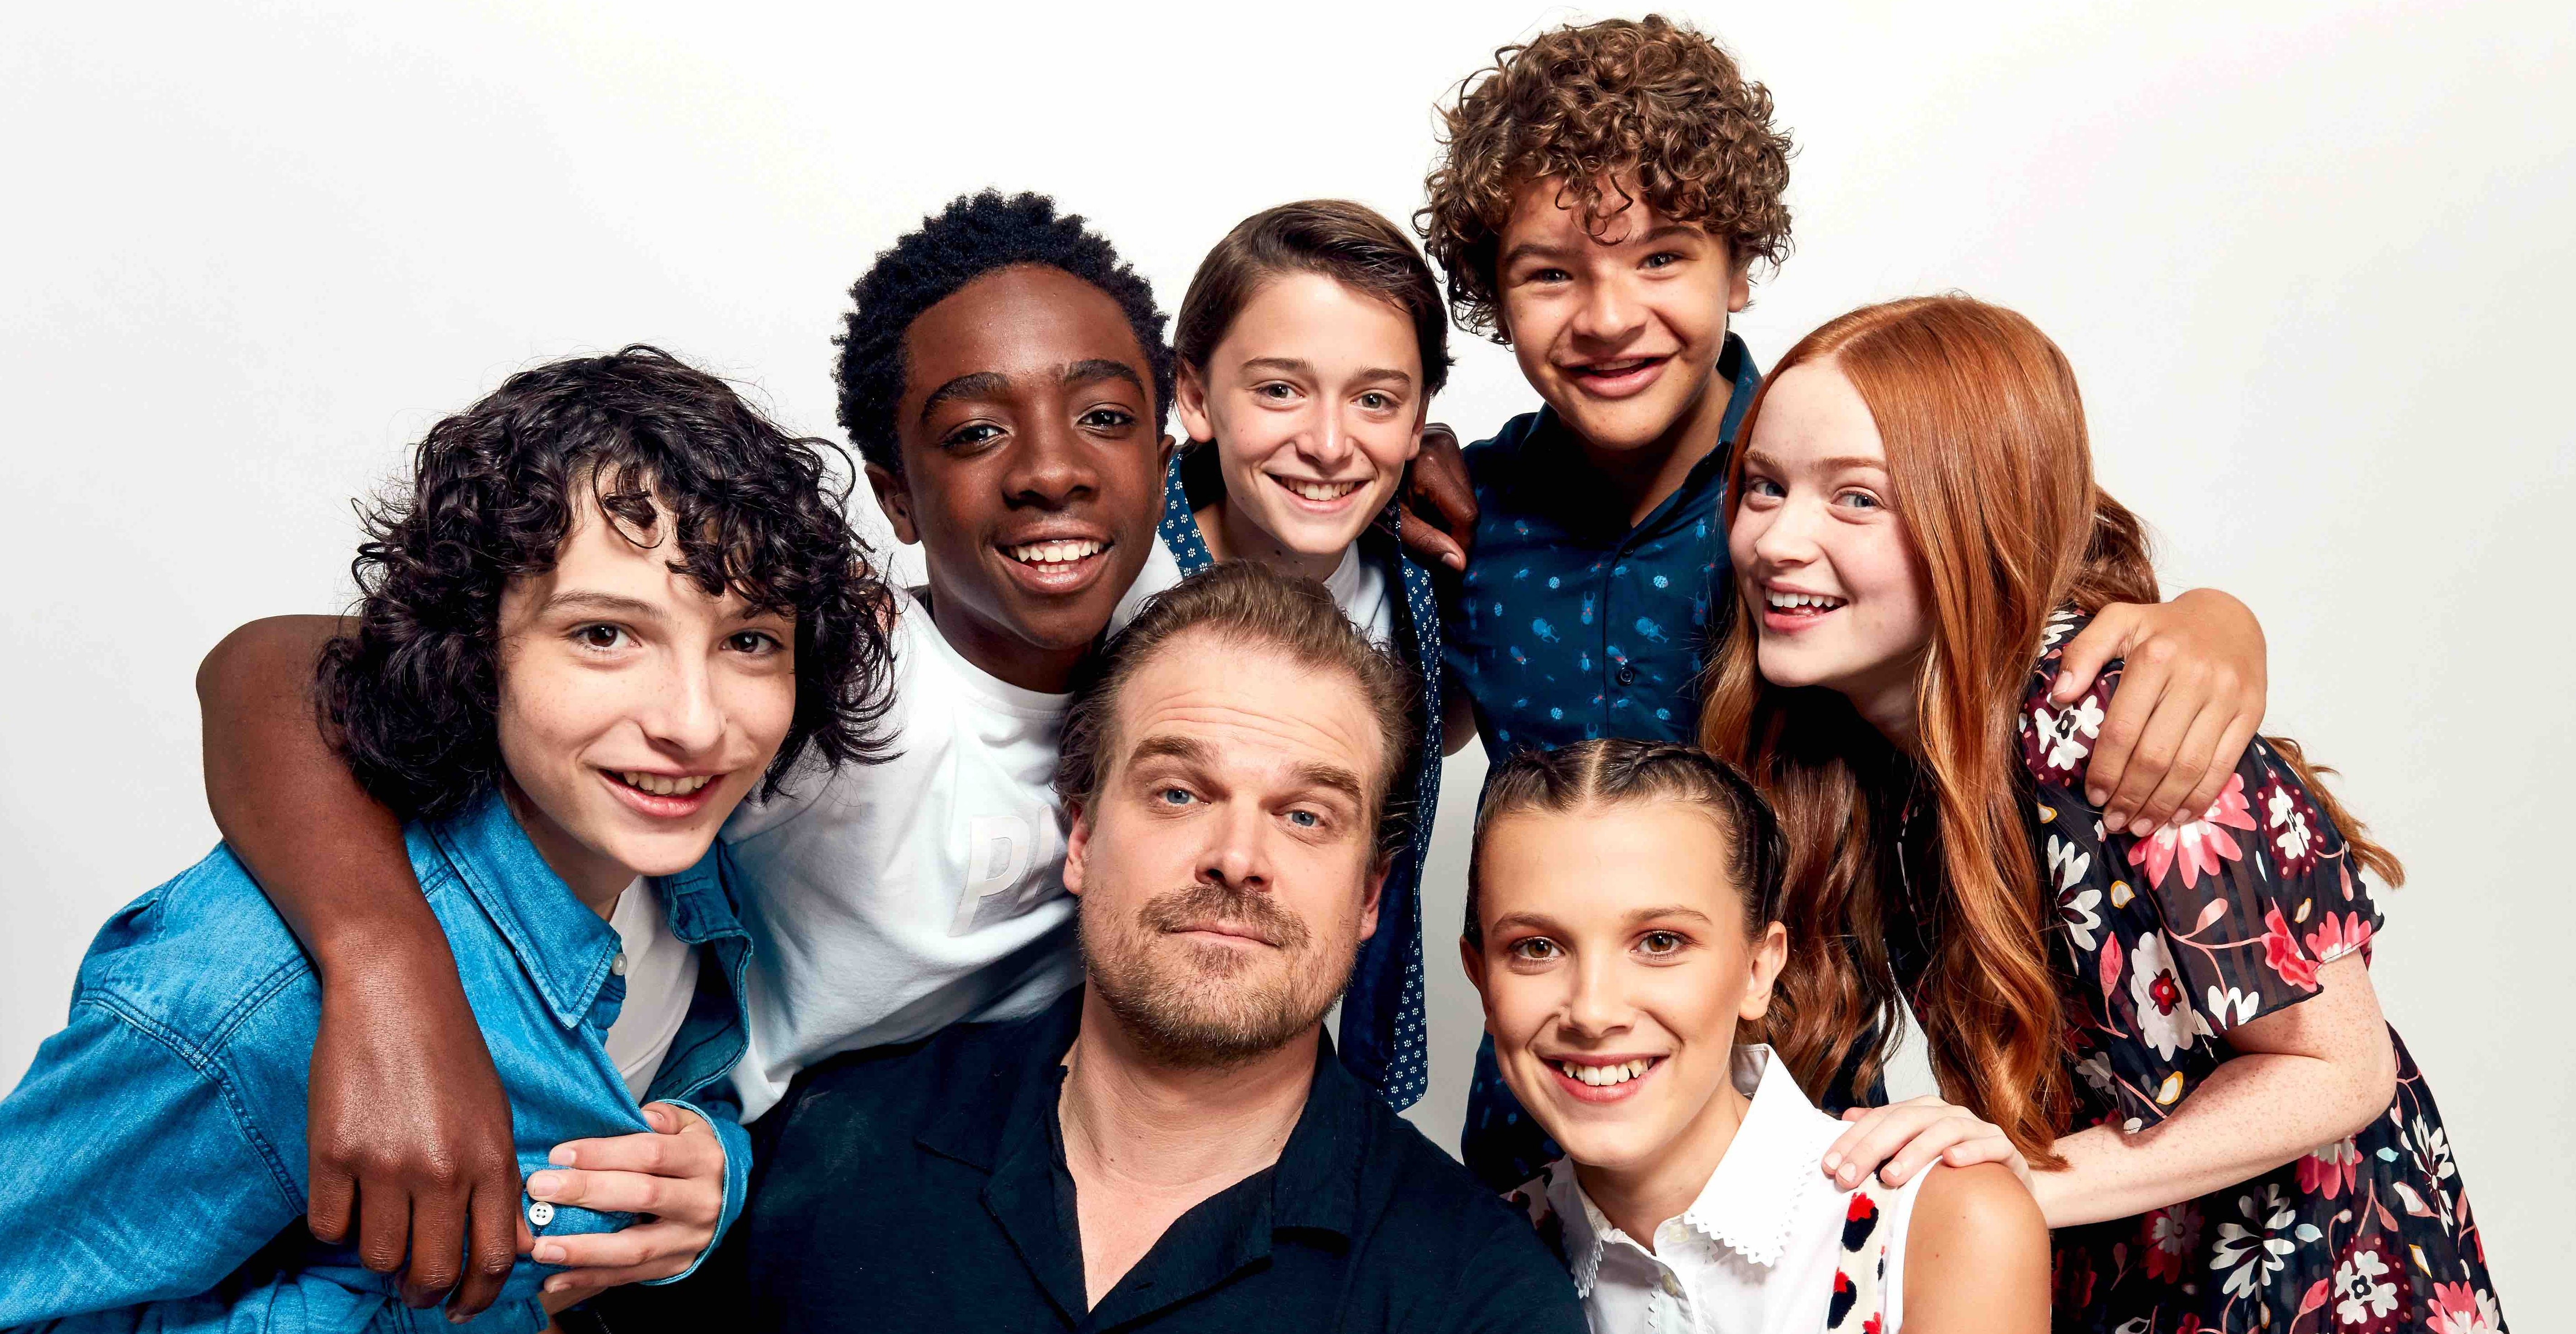 Stranger Things Cast Wallpaper,HD Tv Shows Wallpapers,4k Wallpapers